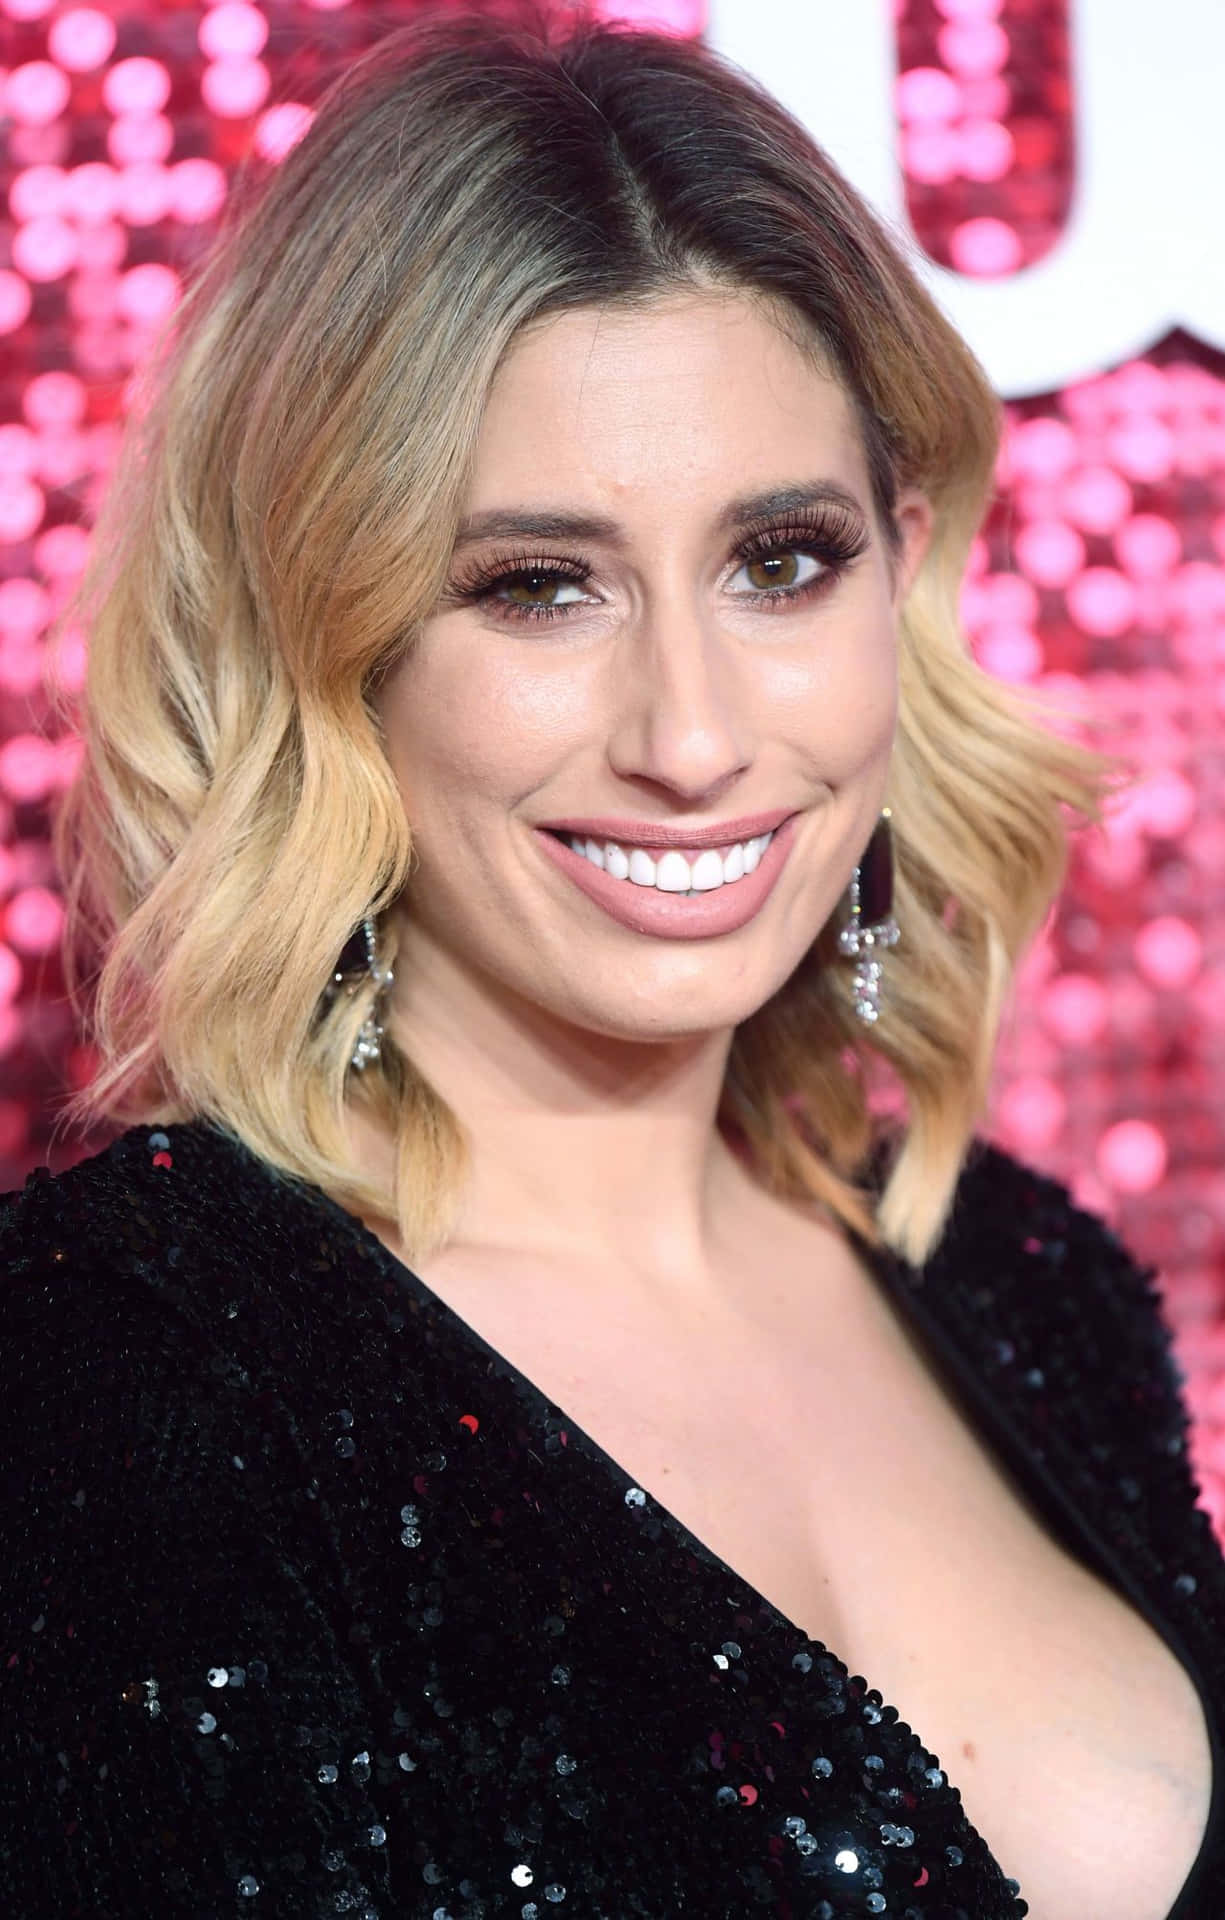 Stacey Solomon Smiling At Event Wallpaper